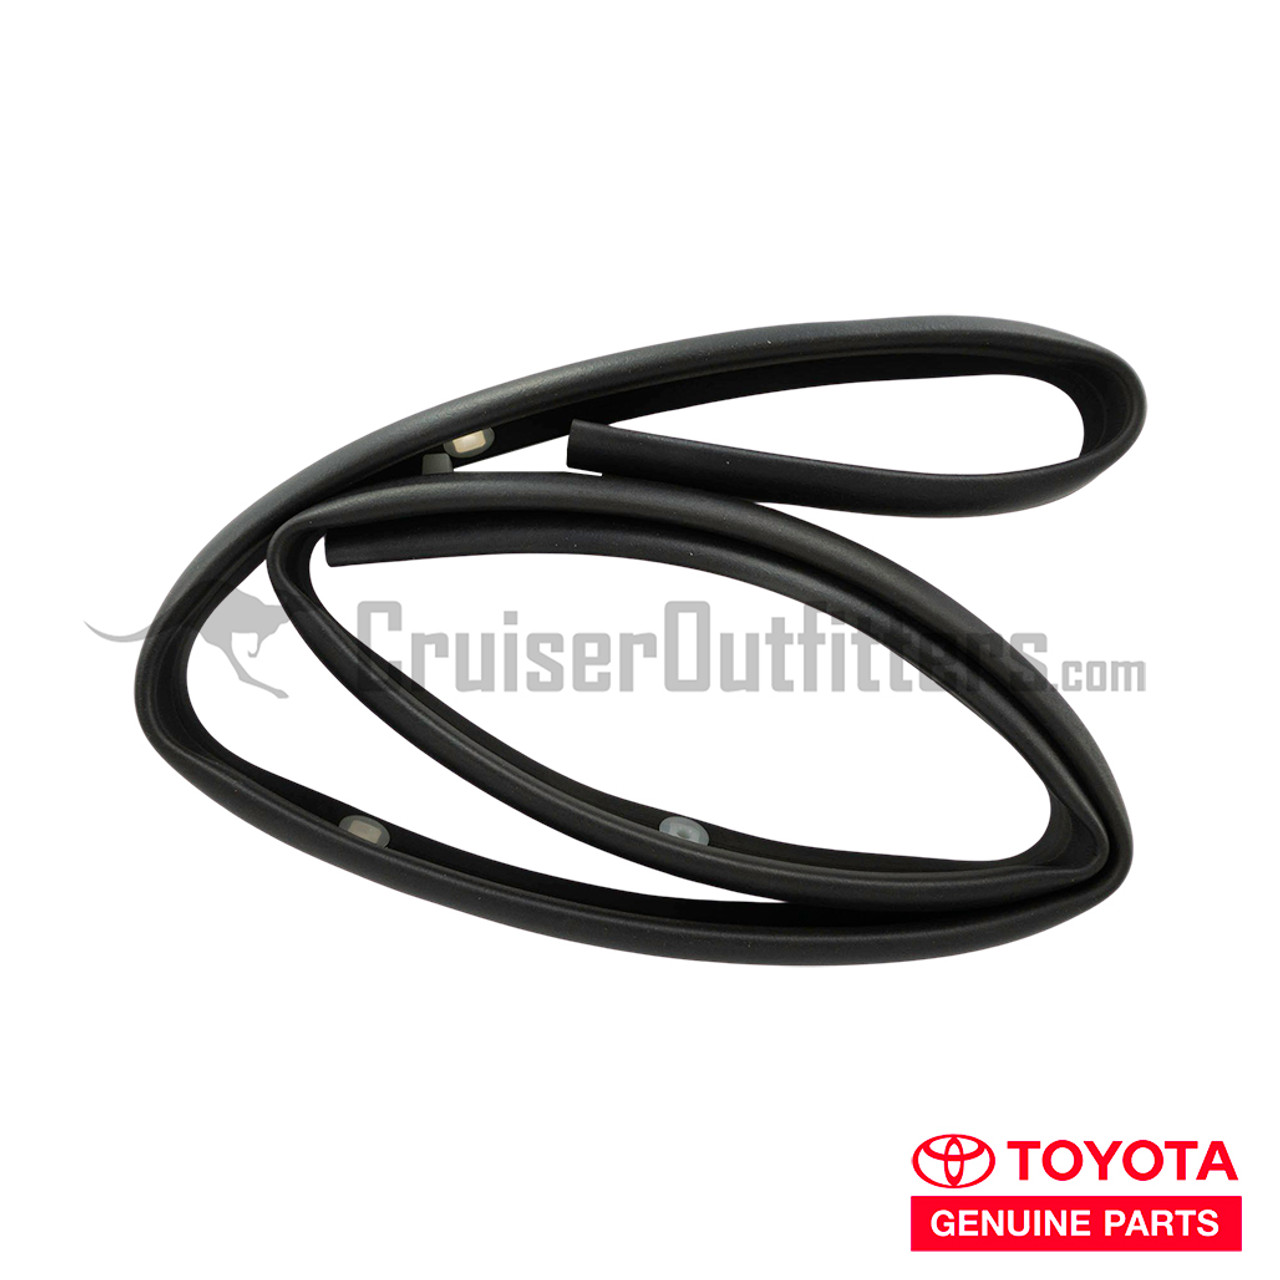 Hood to Cowl Seal - OEM Toyota - Fits 7x Series (WS53383)